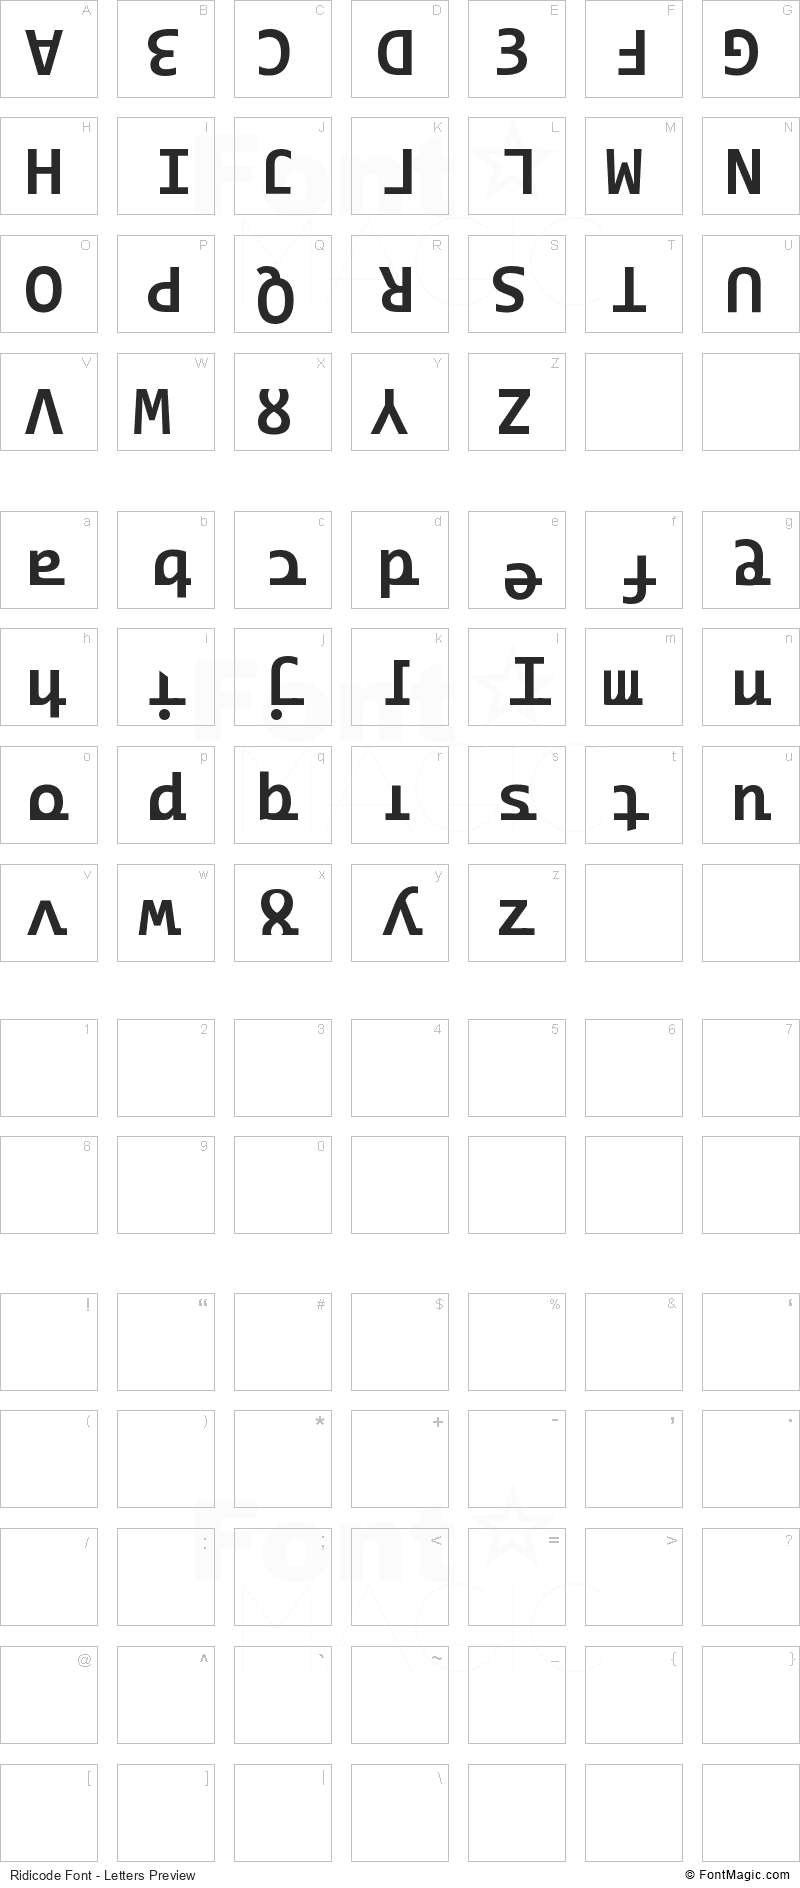 Ridicode Font - All Latters Preview Chart